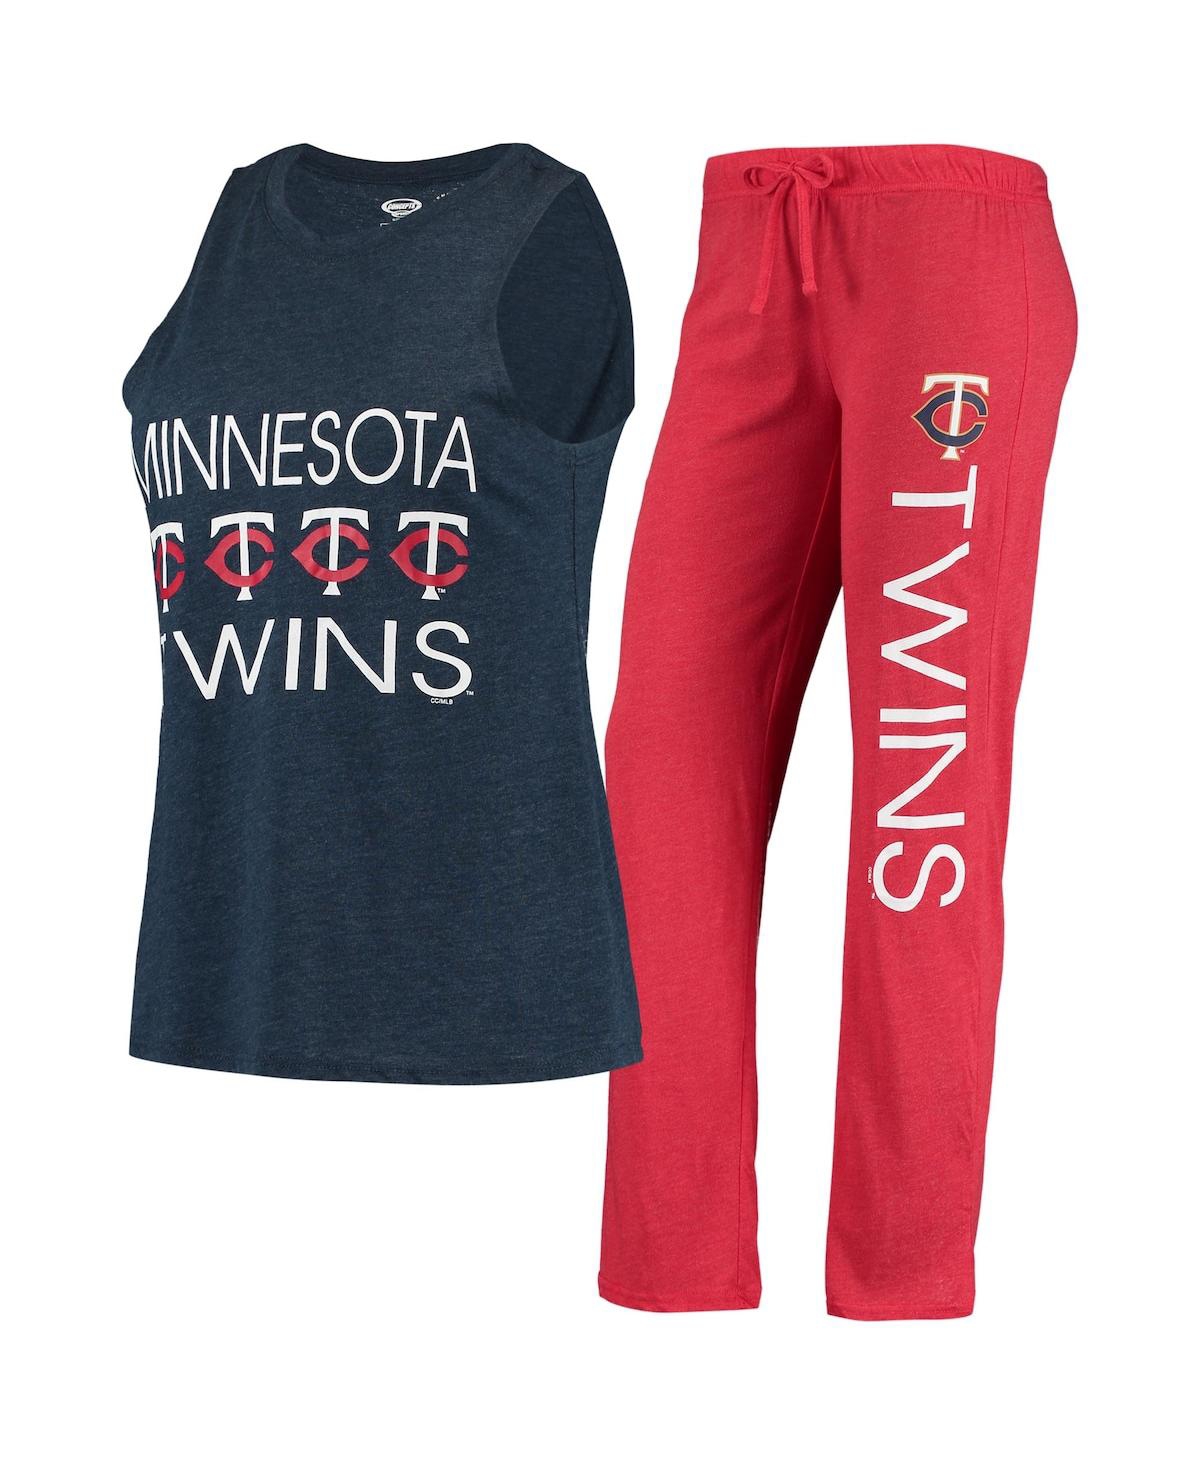 Women's Concepts Sport Red, Navy Minnesota Twins Meter Muscle Tank Top and Pants Sleep Set - Red, Navy